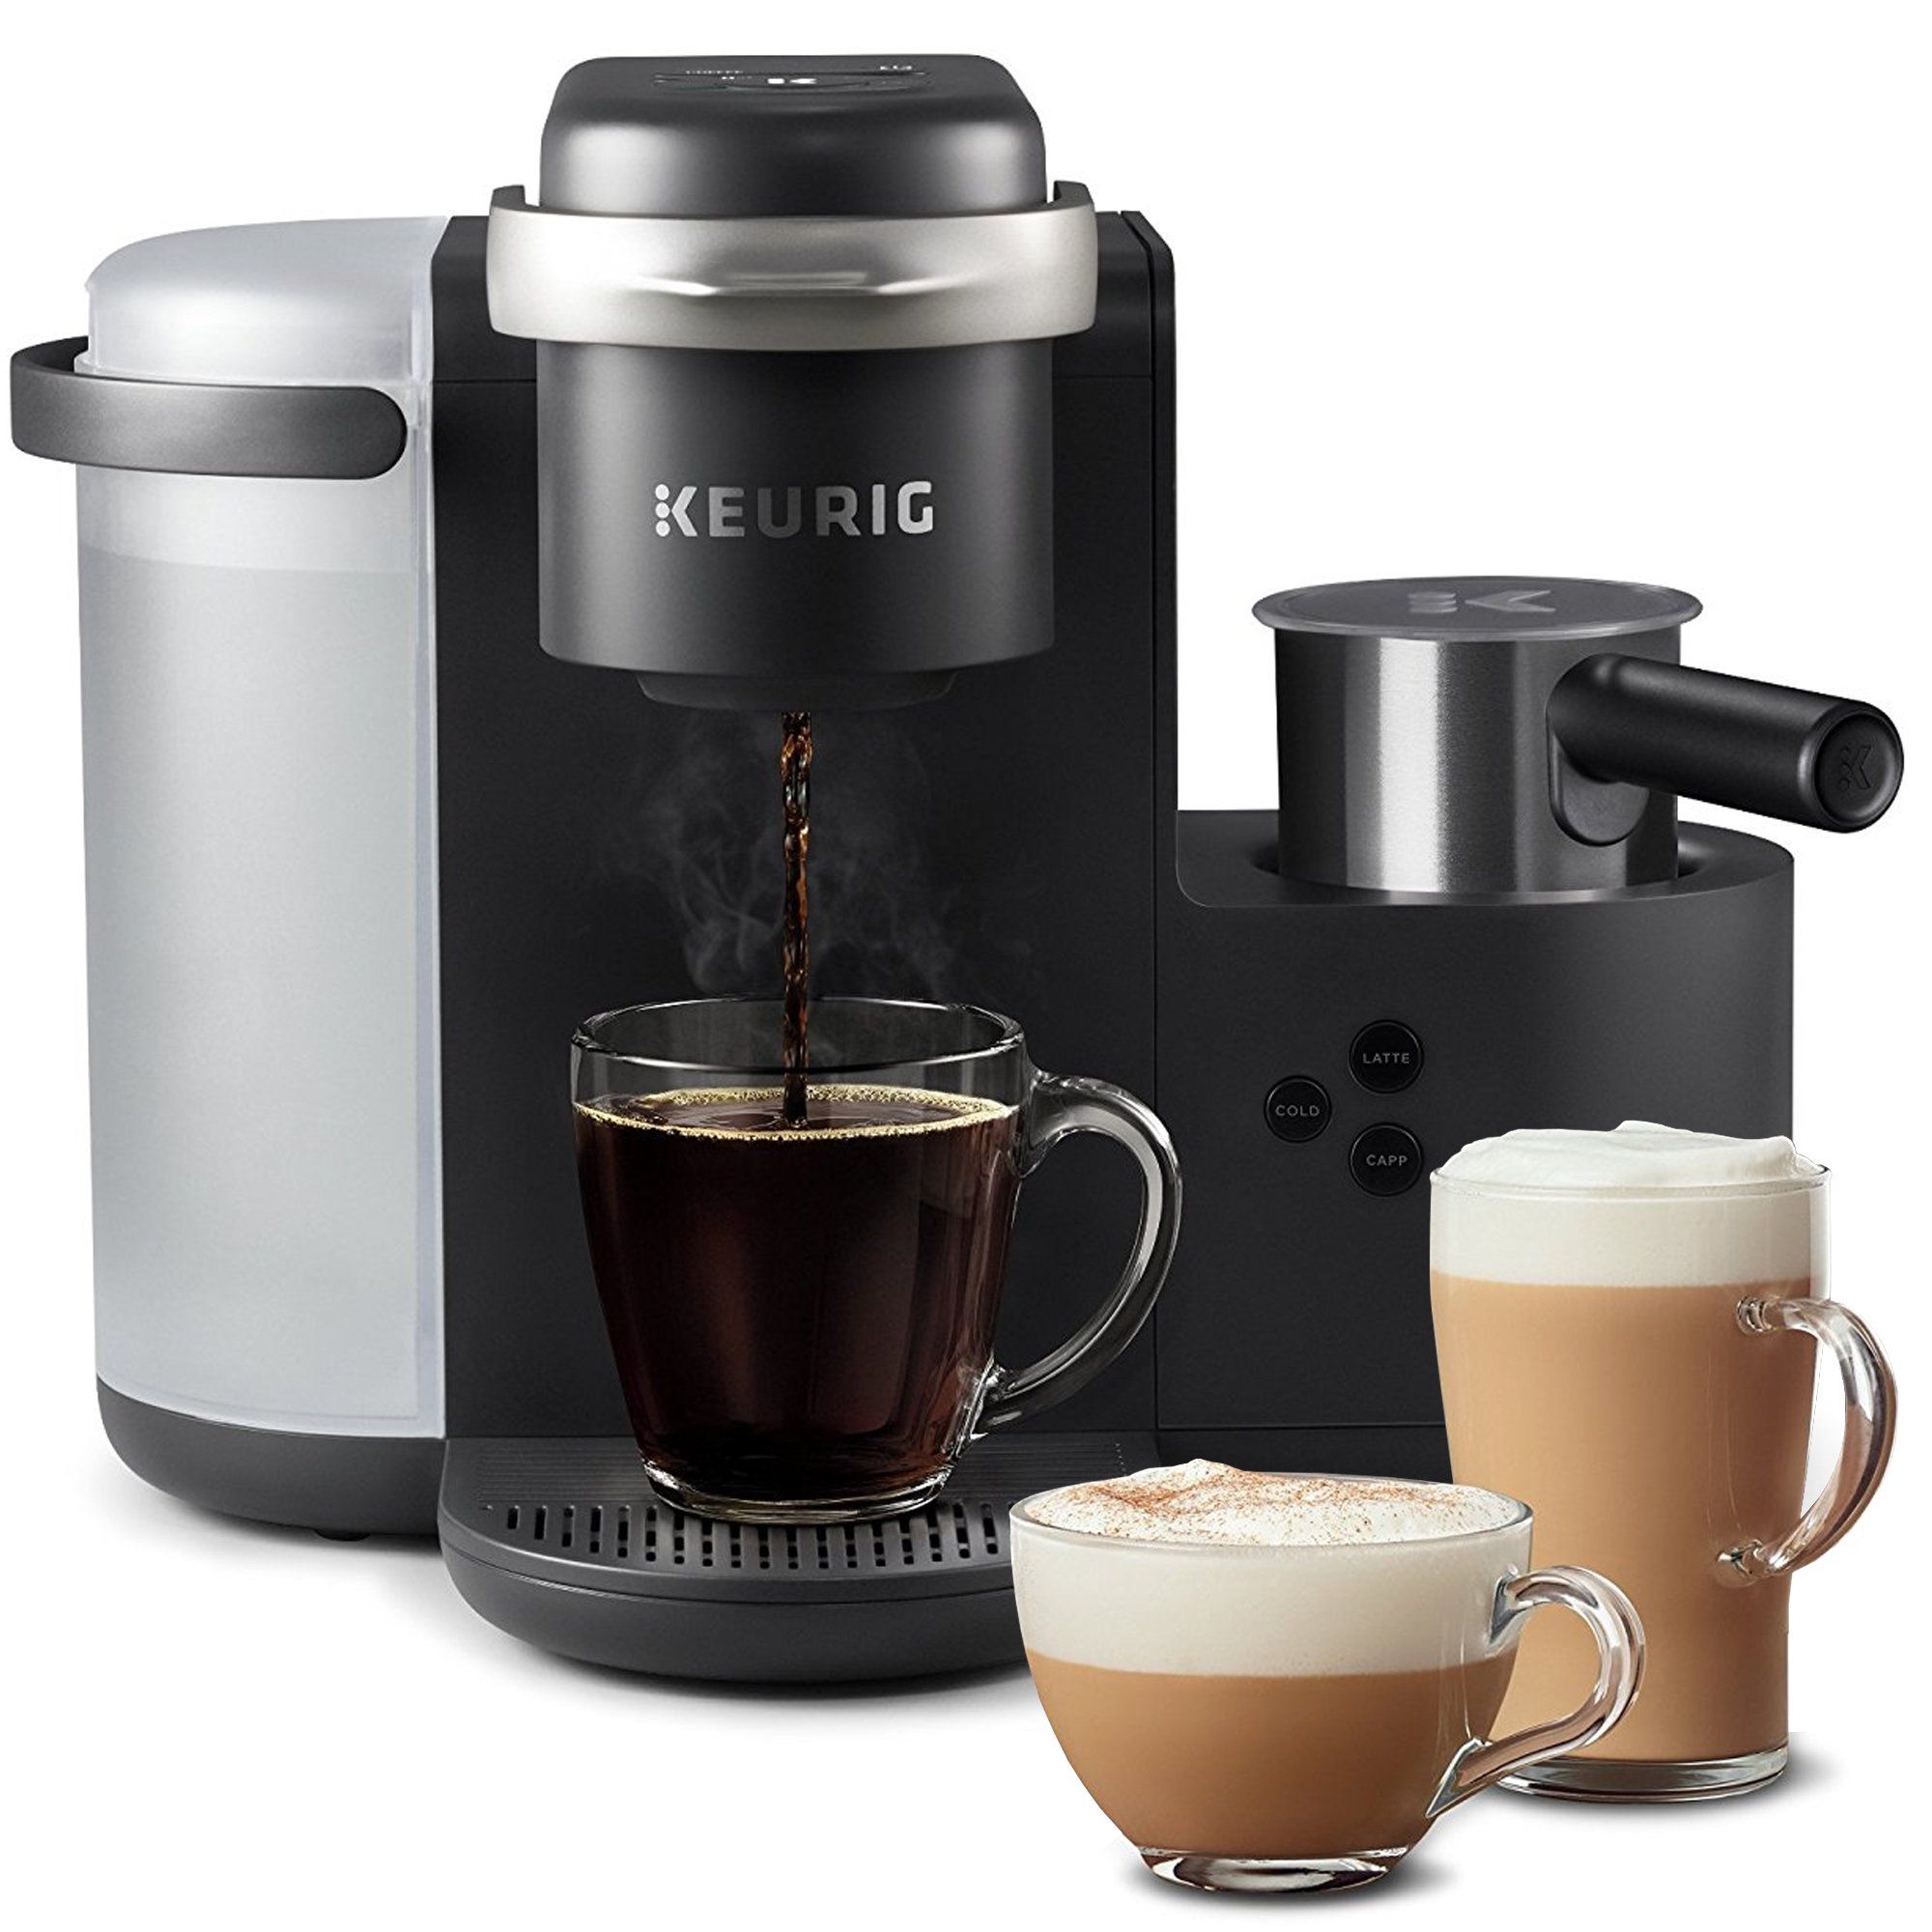 Keurig K-Cafe Single Serve K-Cup Coffee, Latte and Cappuccino Maker, Charcoal | Walmart (US)